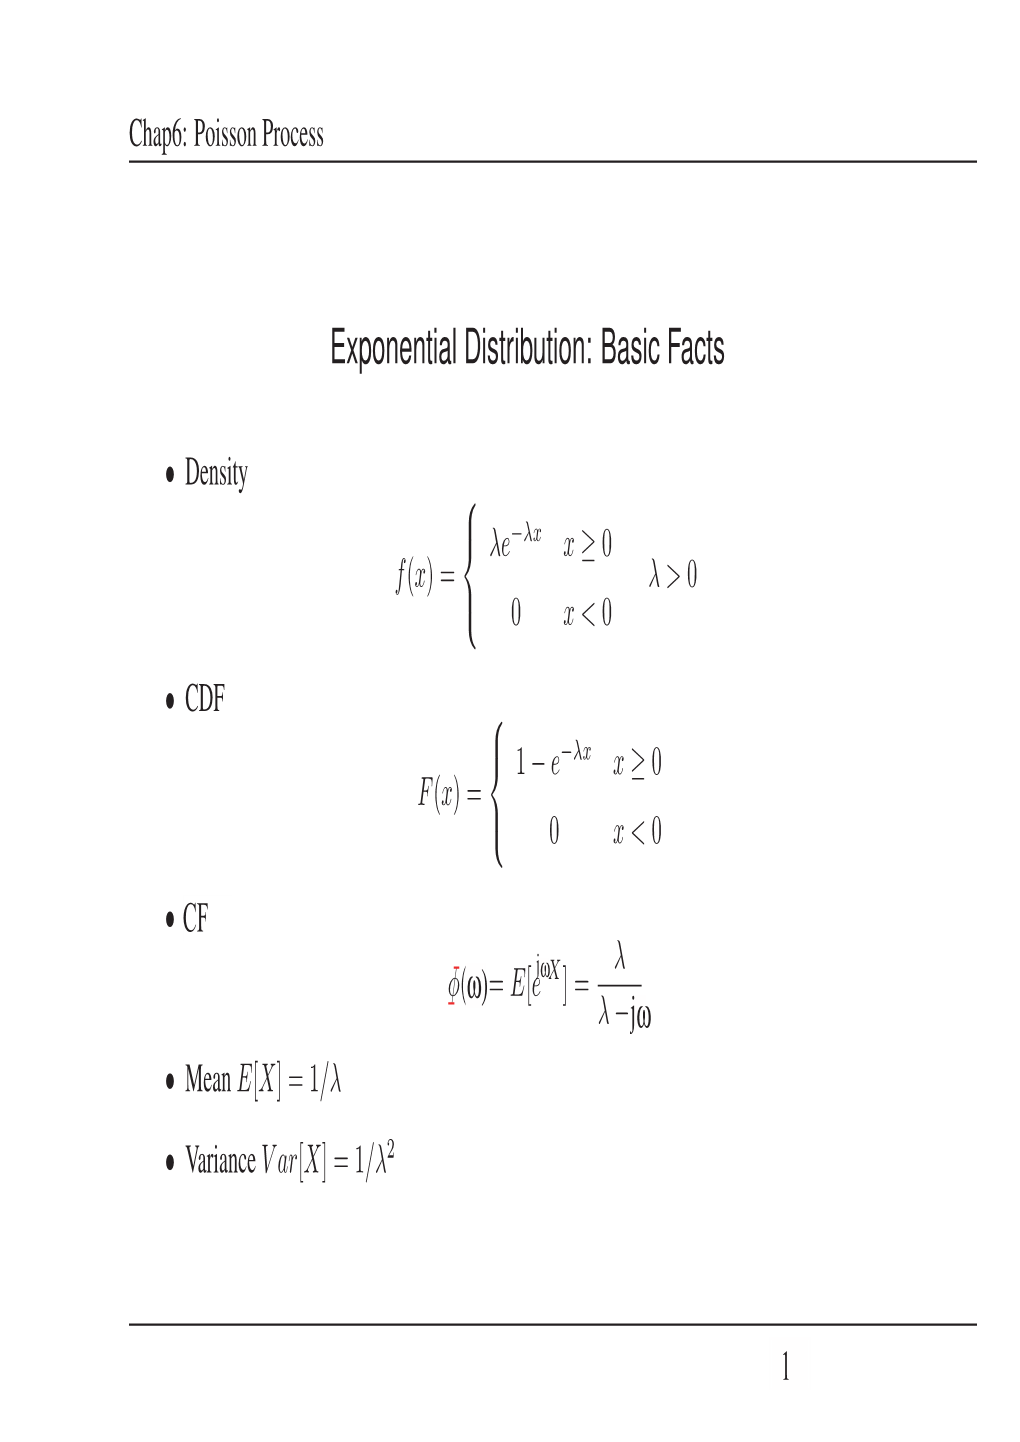 Exponential Distribution: Basic Facts